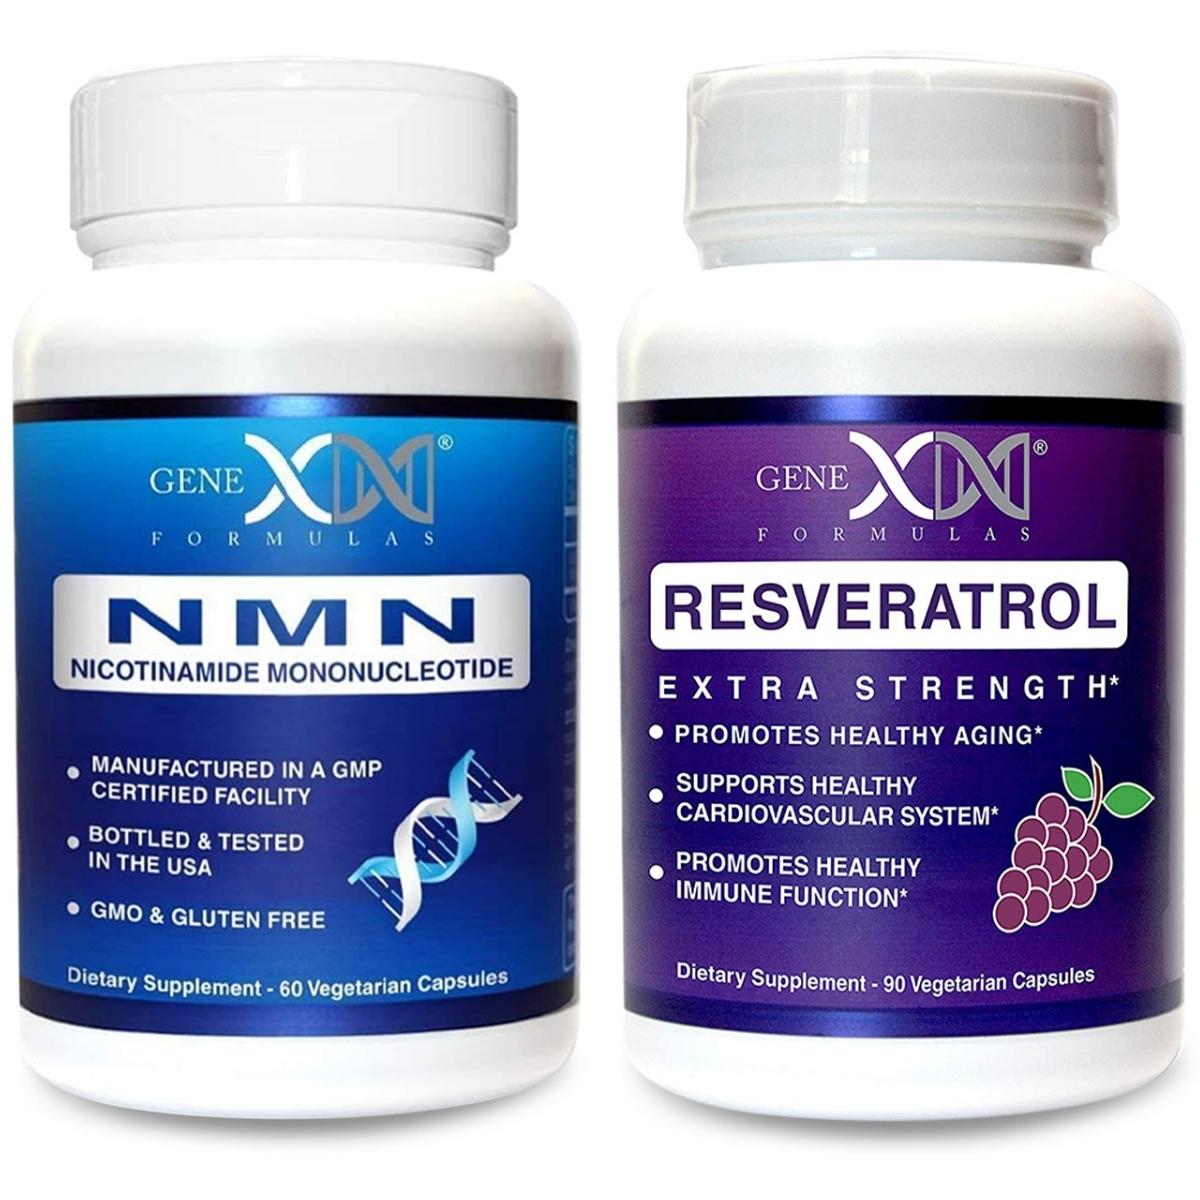 NMN and Resveratrol Dynamic Duo